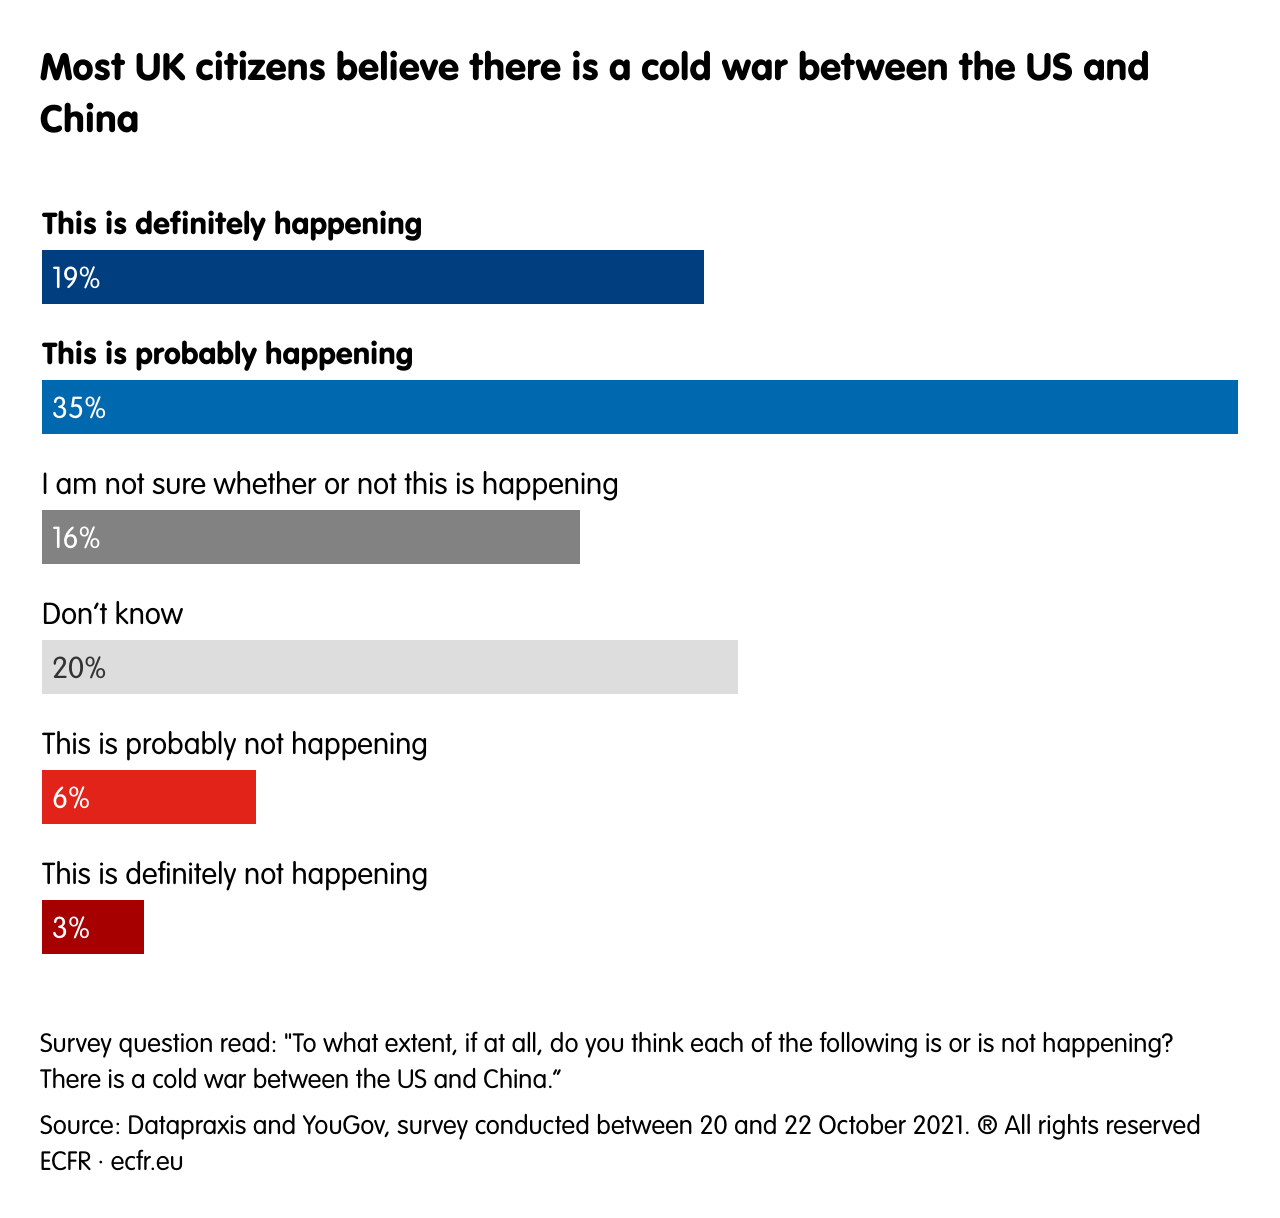 Most UK citizens believe there is a cold war between the US and China